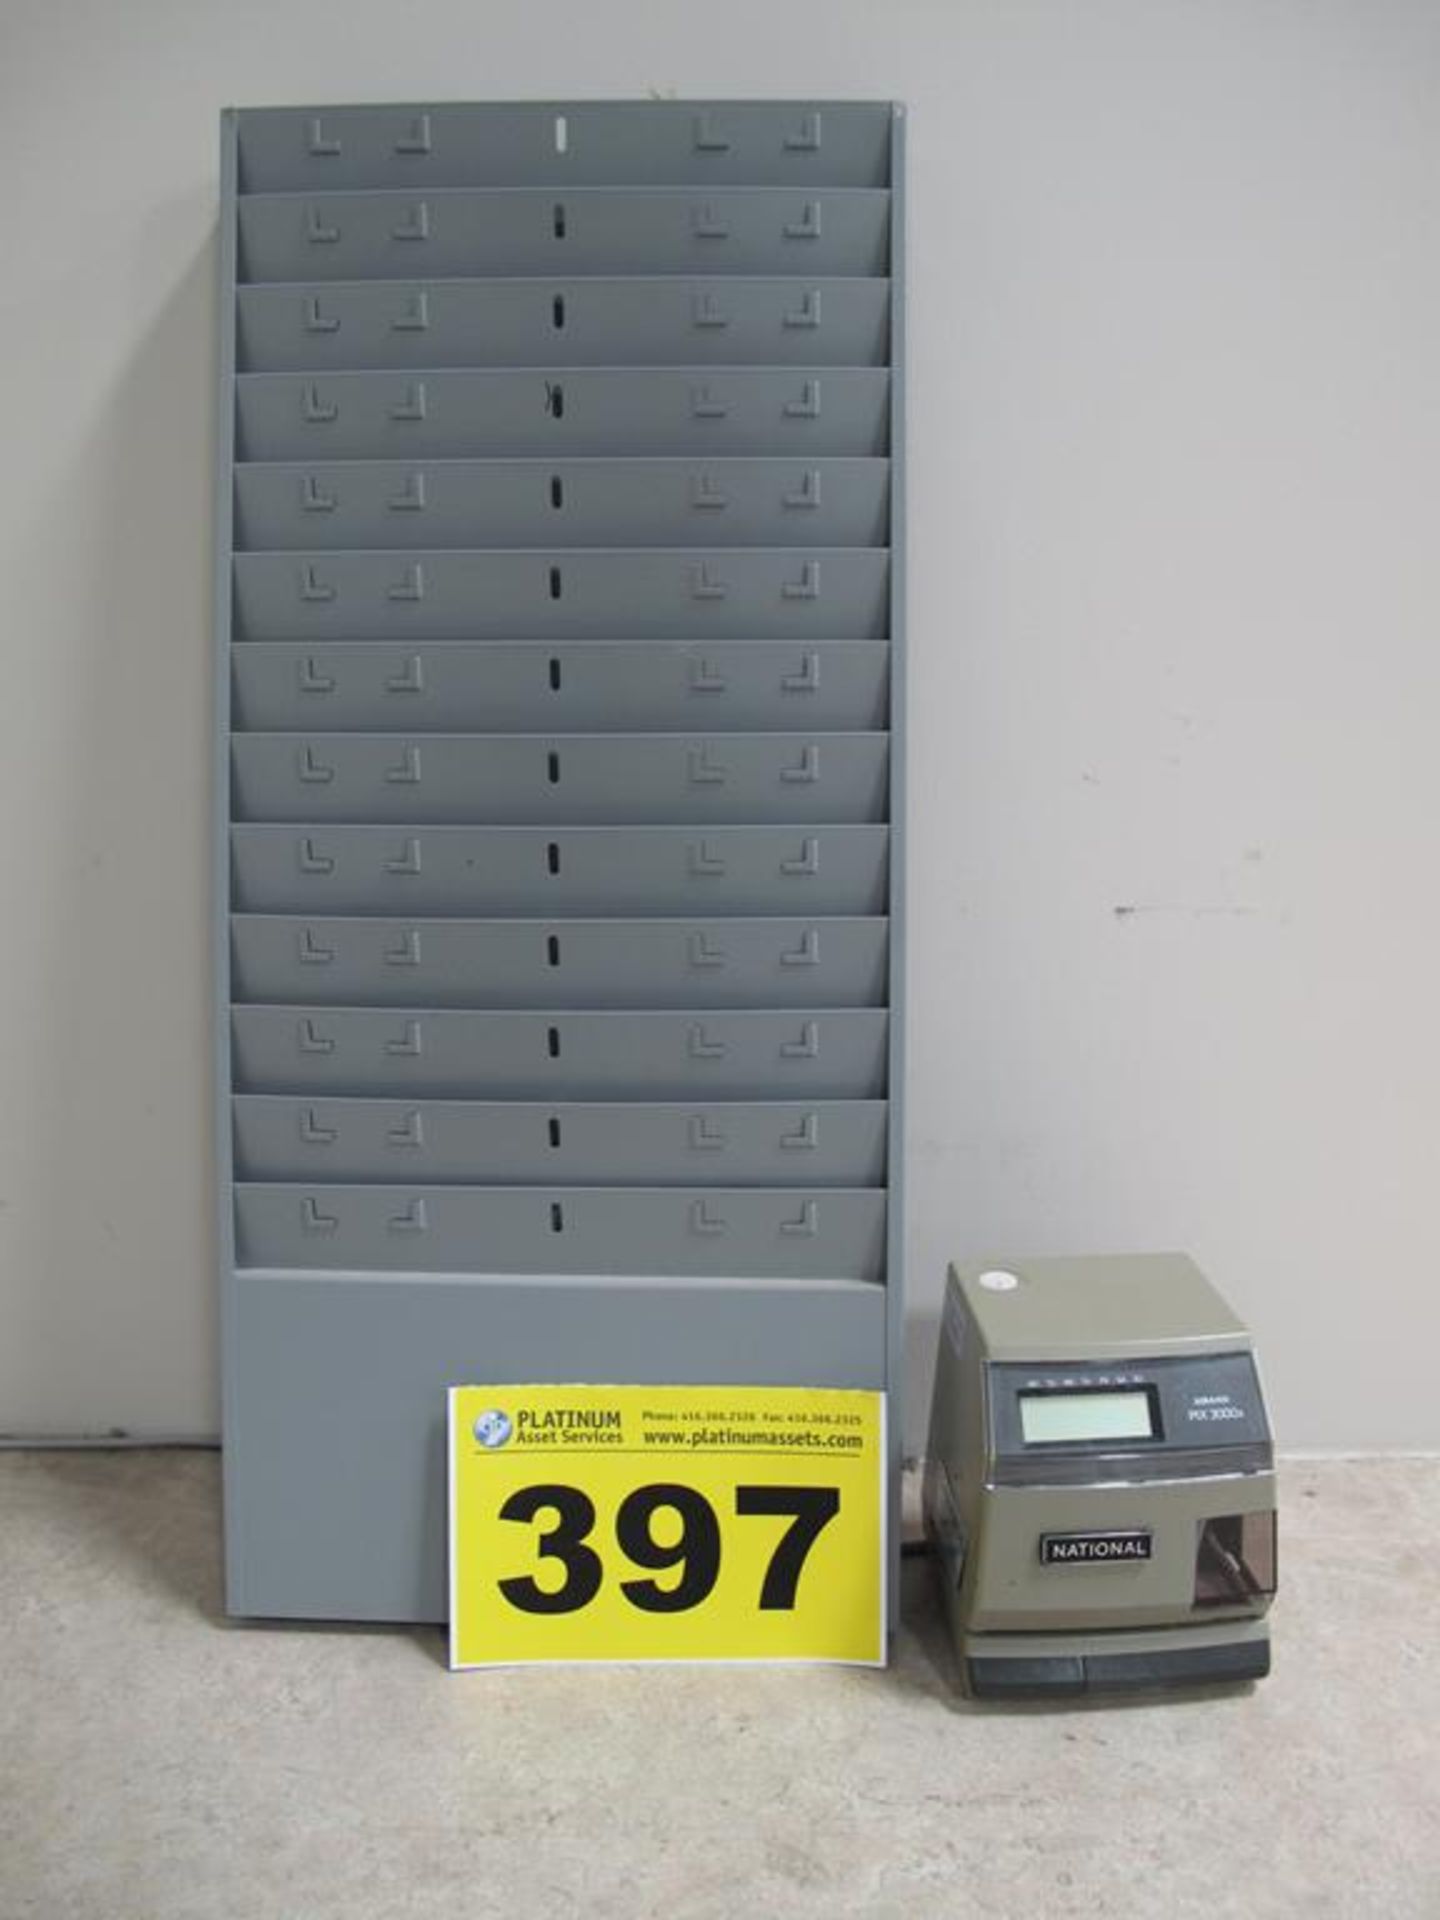 NATIONAL, AMANO PIX 3000X, TIME CARD SYSTEM WITH TIME CARD HOLDER, S/N 381092219